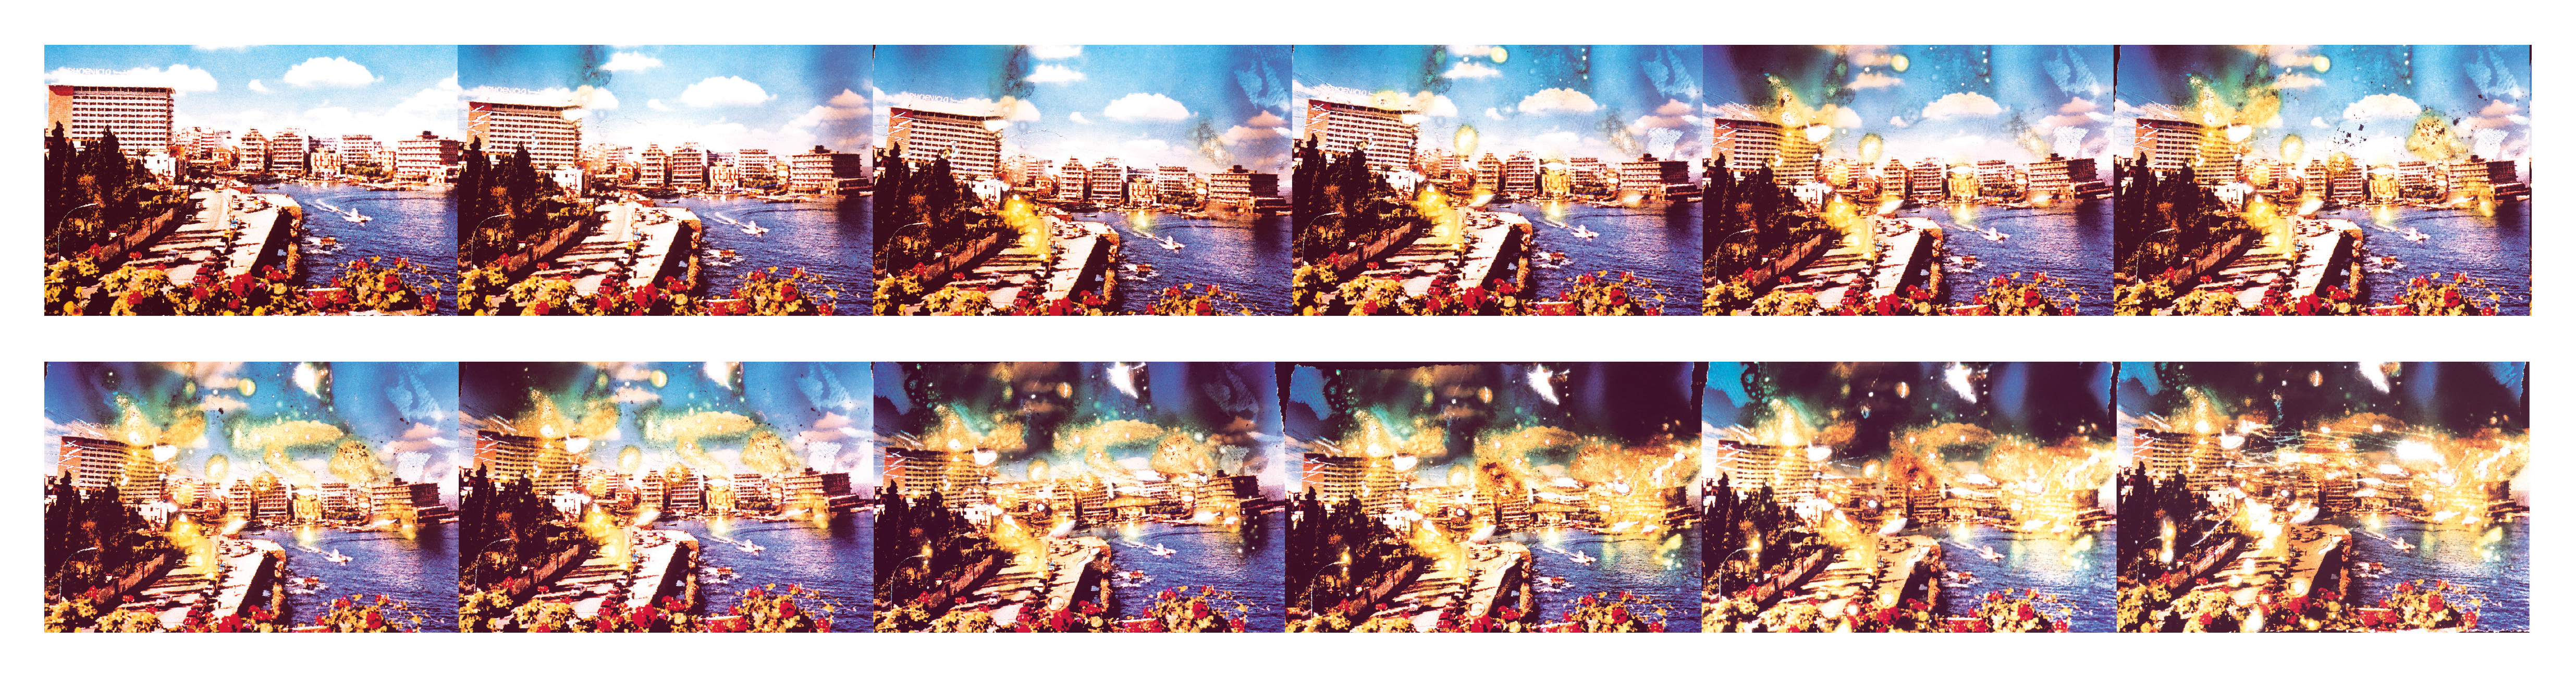 This postcard of “Beirut: The Great Hotels Quarter” was taken by Abdallah Farah in August 1969 as a slide photograph and printed in an edition of 15,000. The slide was burned by Farah following the battle that took place between 16 March and 30 March 1976 when the hotels were again occupied by armed elements. The Holiday Inn and the Hilton and the Normandy hotels, which had been controlled by the Christian Kataebs, were taken over by the leftist fighters. The battlescene then shifted to the city center.